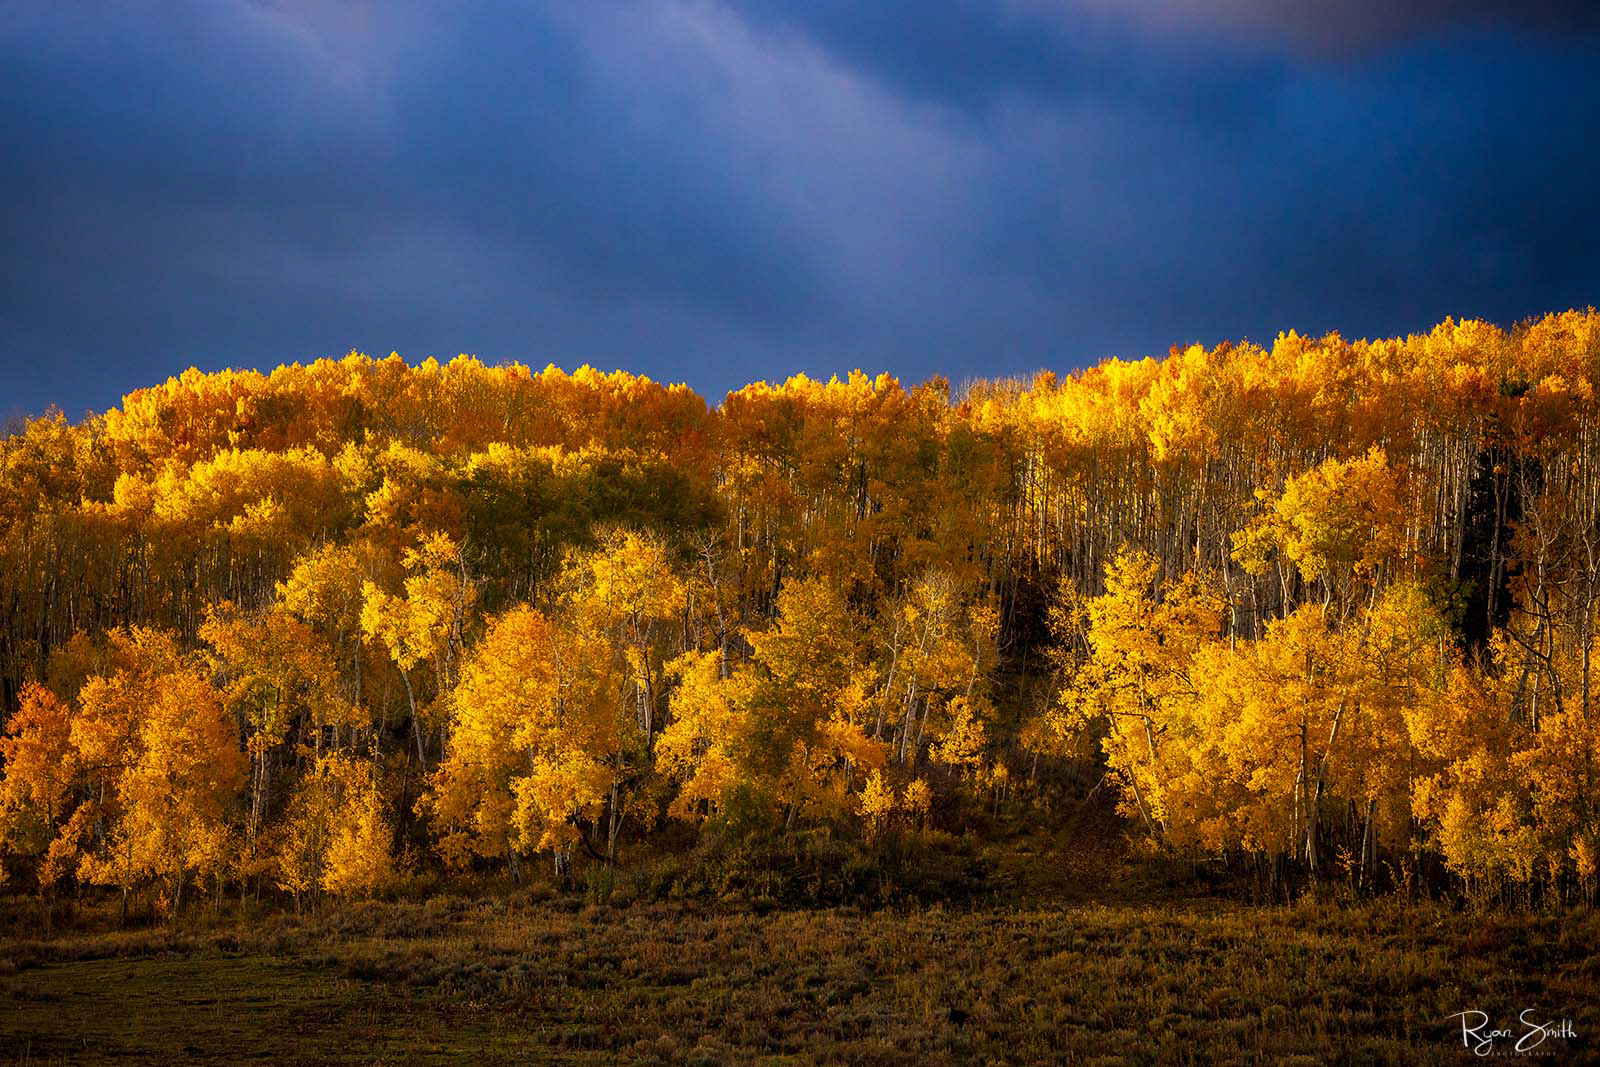 Yellow leaved aspen trees are lit by the sun while the sky is dark yet the forest glows golden.